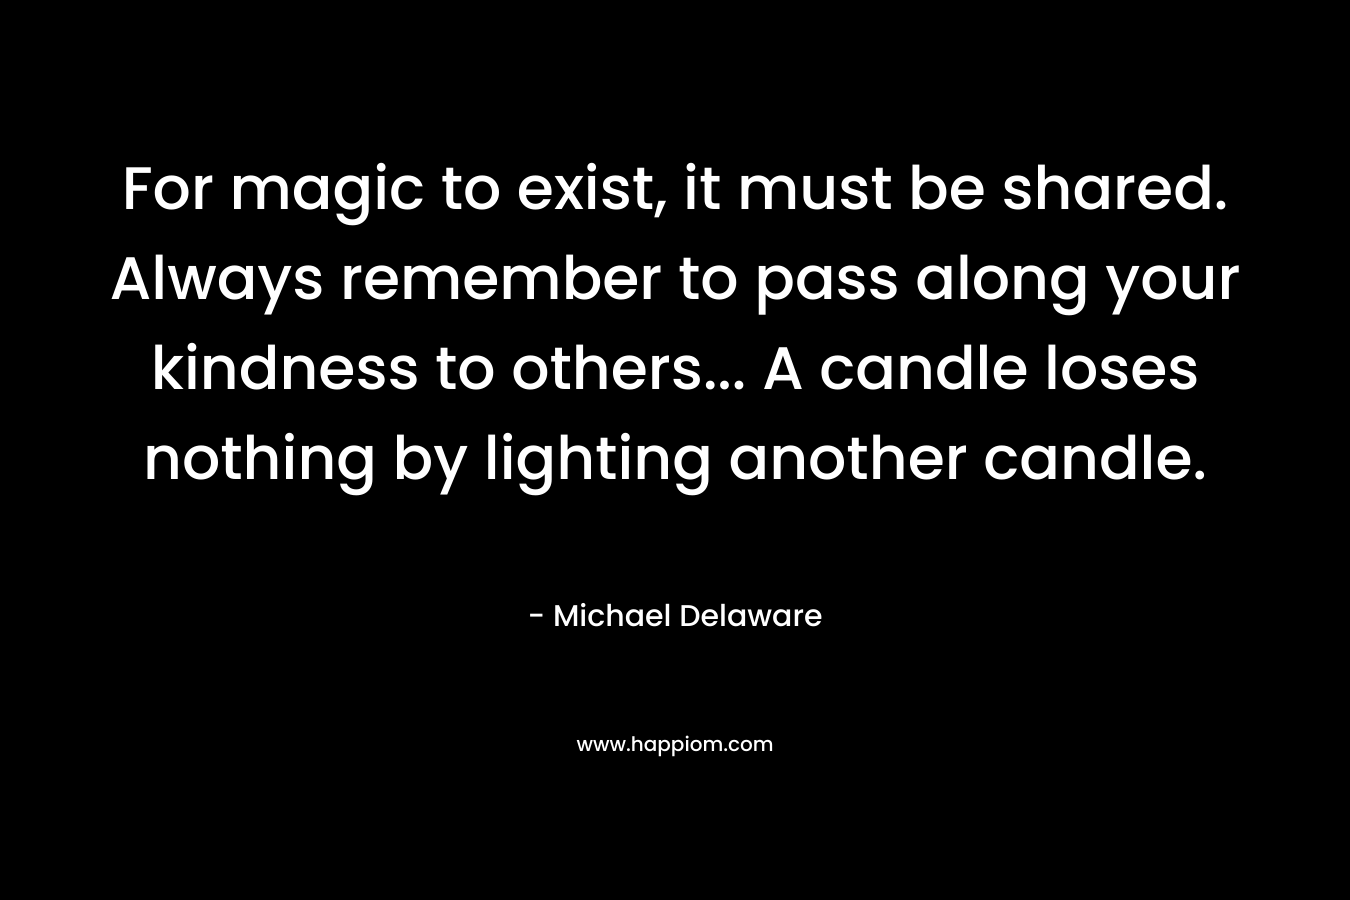 For magic to exist, it must be shared. Always remember to pass along your kindness to others... A candle loses nothing by lighting another candle.